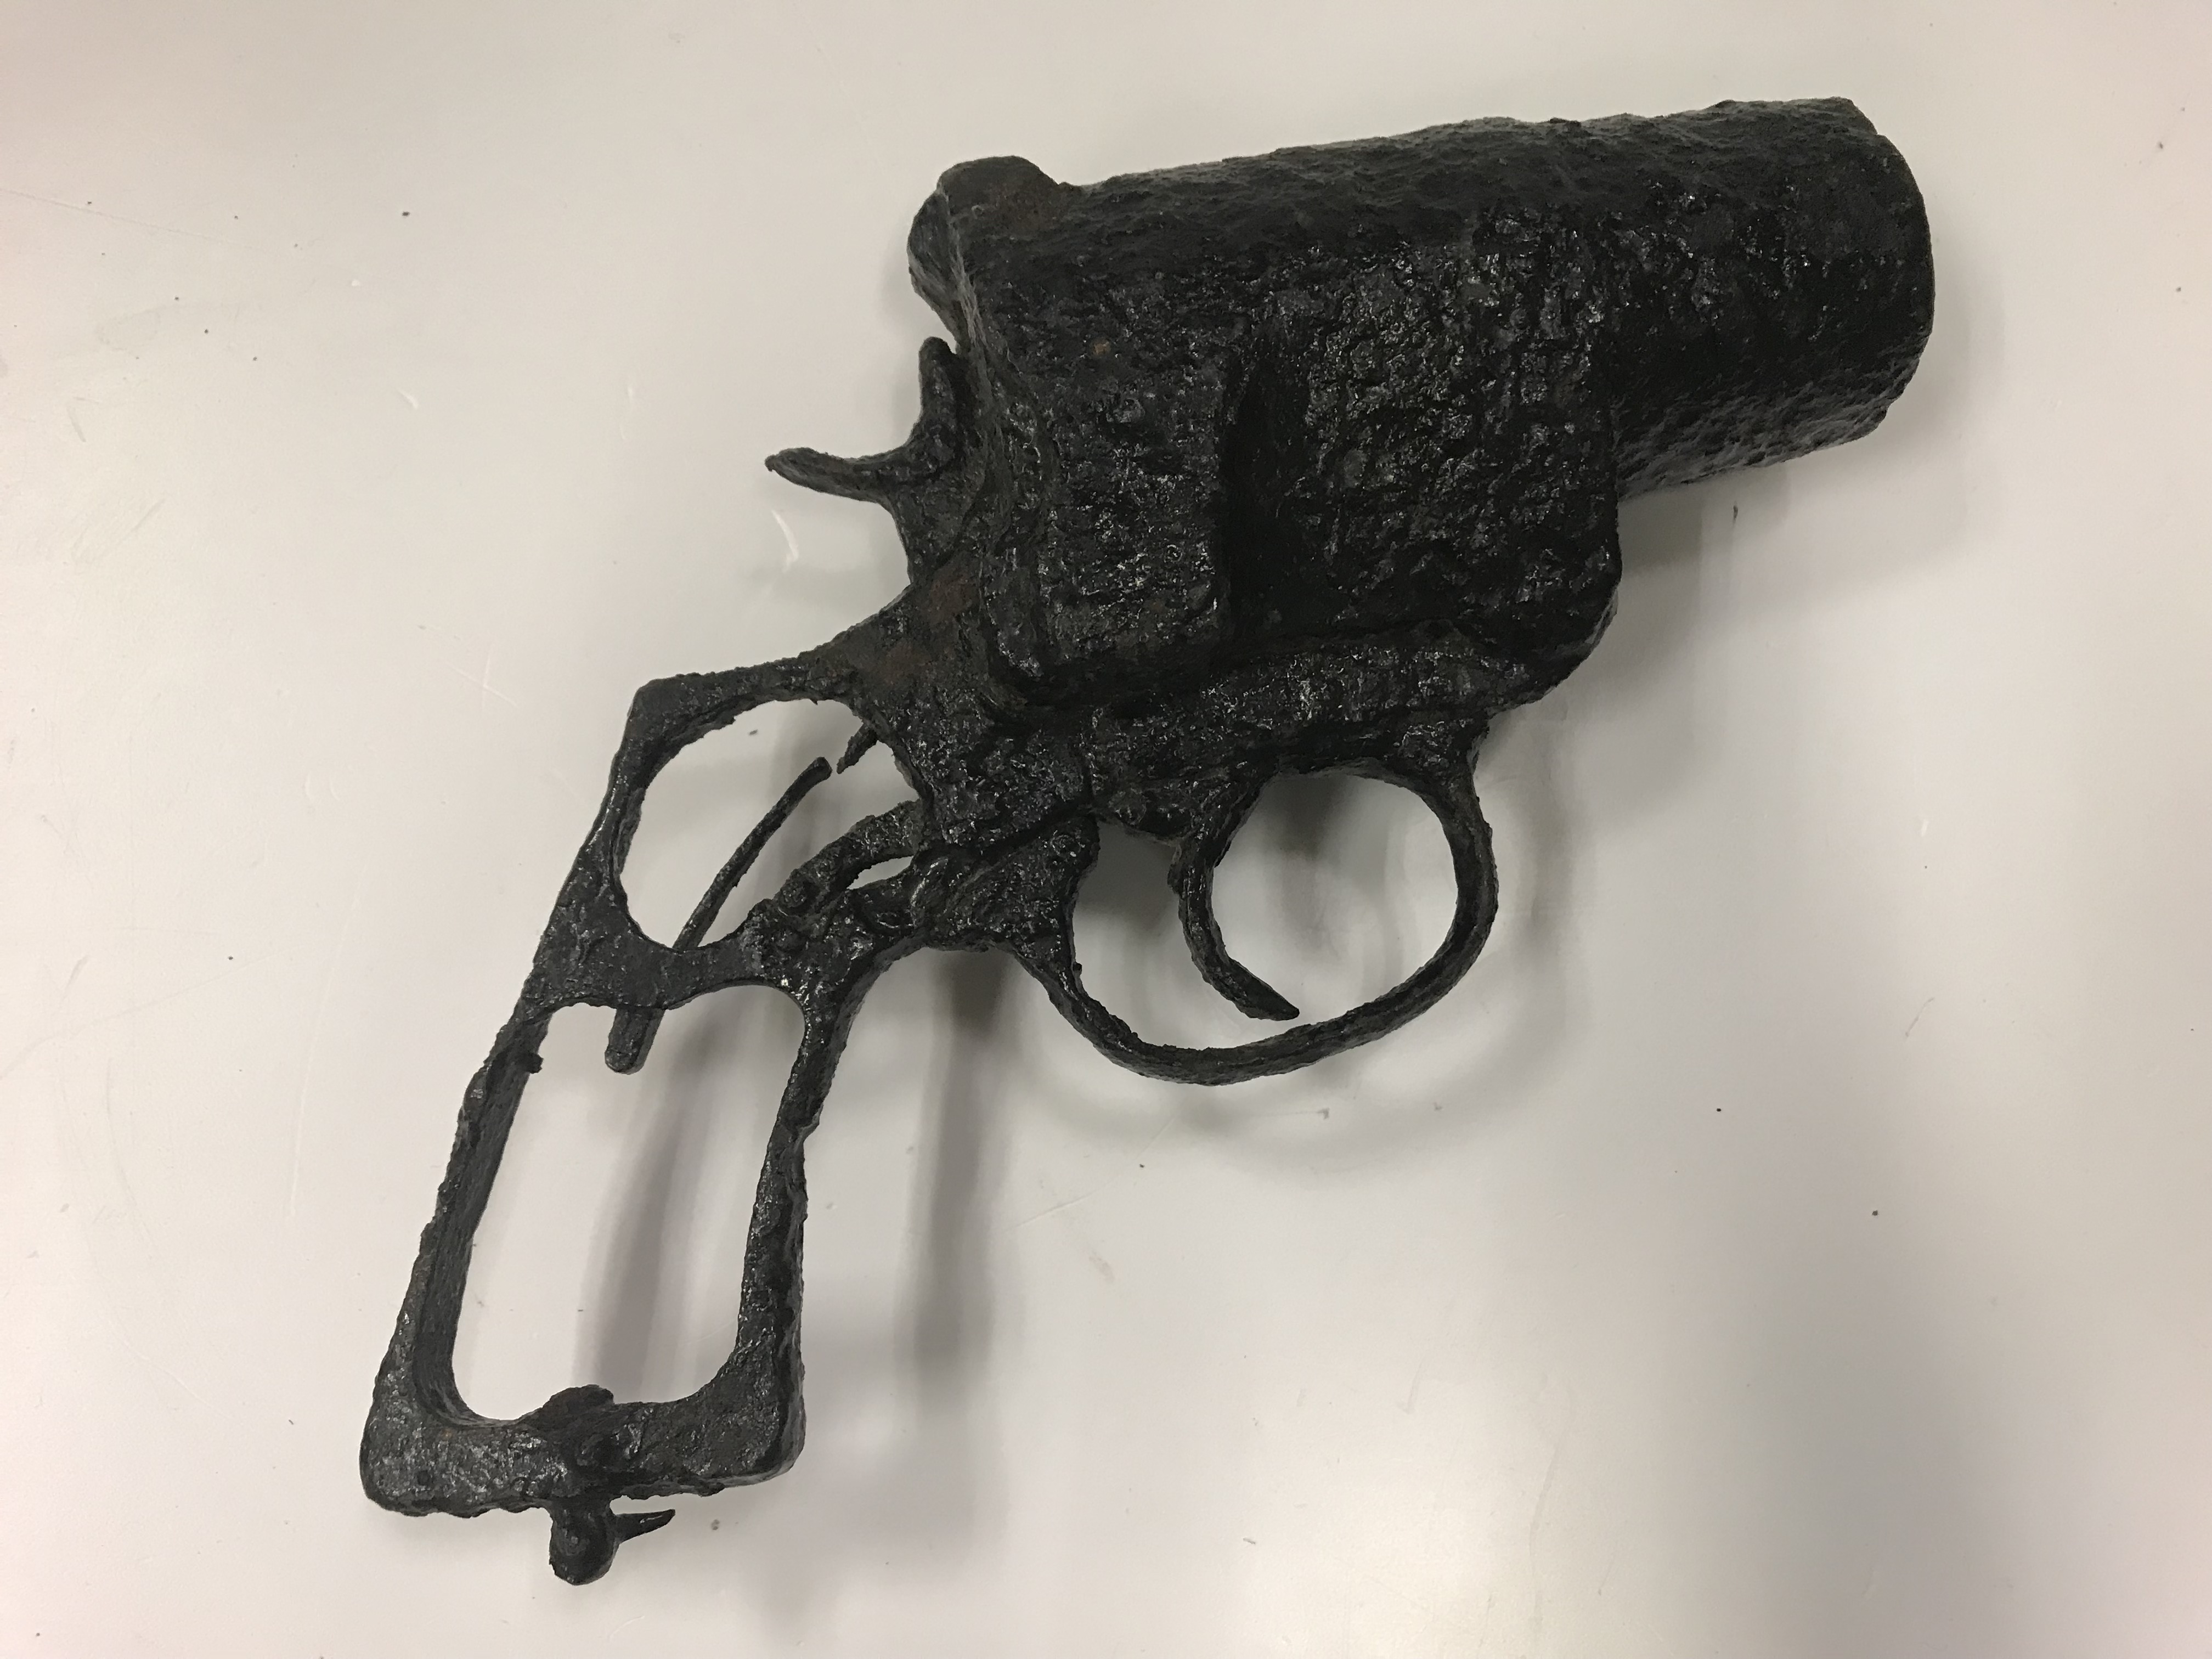 A World War I flare gun, possibly Webley & Scott, very corroded/non-functioning 21 cm in length